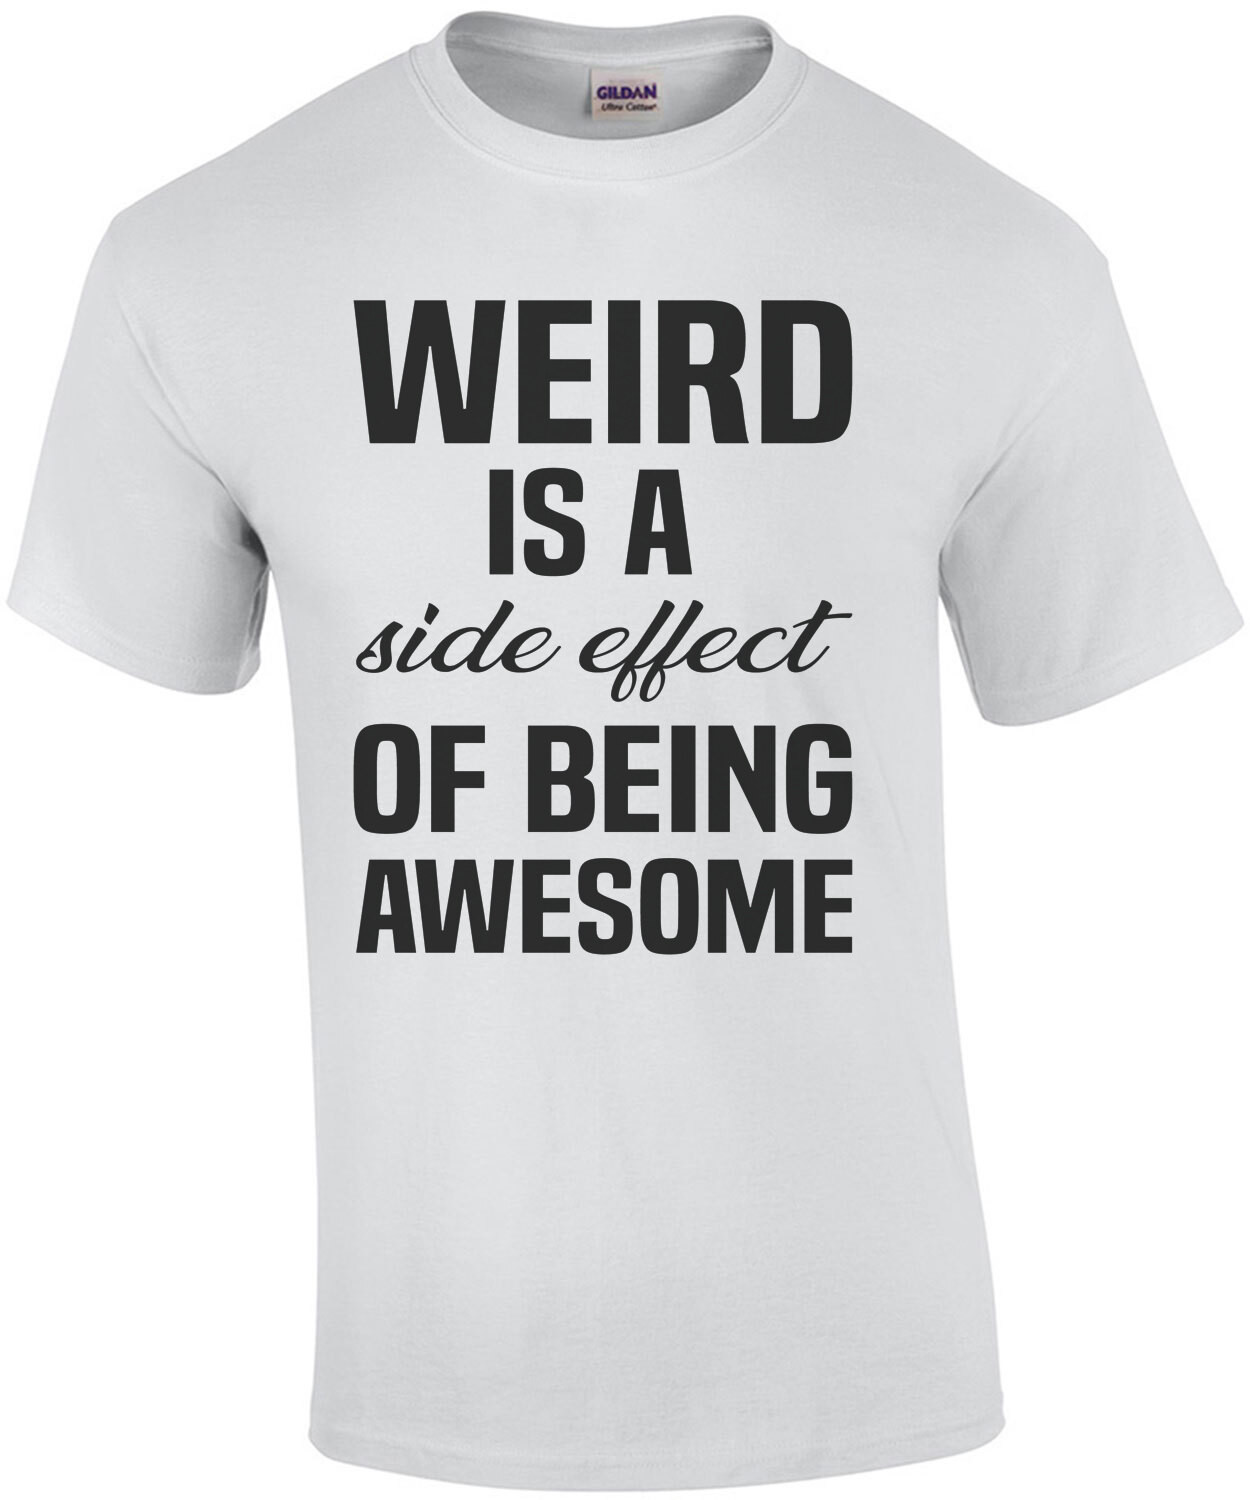 Weird is a side effect of being awesome - funny t-shirt